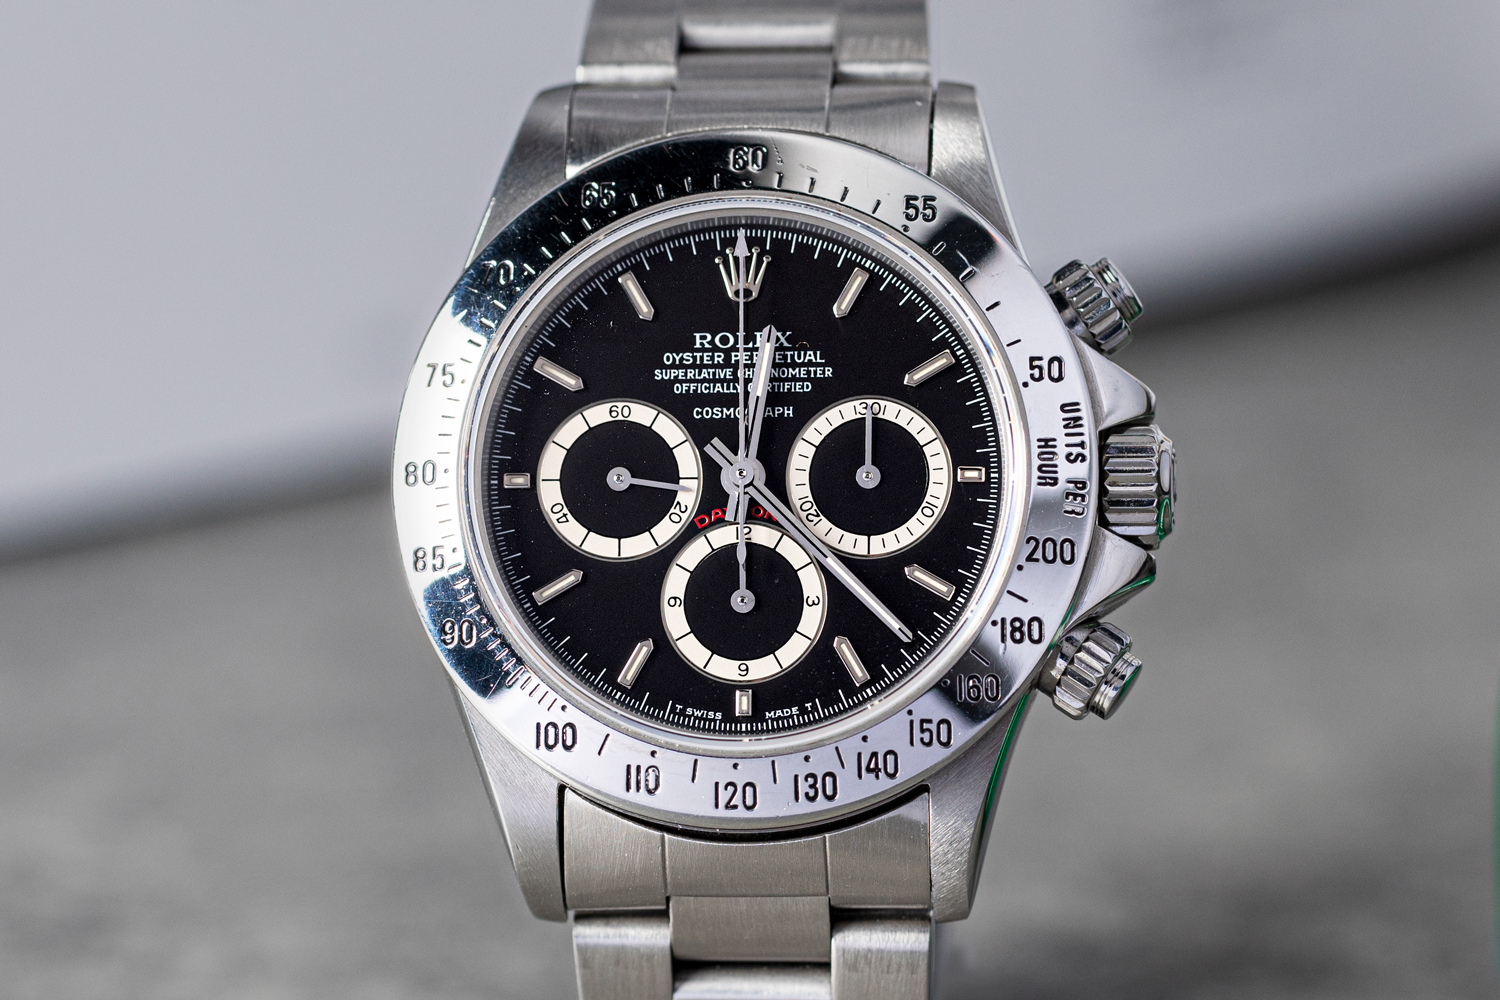 The Rolex Daytona 16520 was produced from 1988 to 2000 with various subtle nuances in its dial design, throughout its production run. The author’s 16520 is an R-series with floating “Cosmograph” and inverted “6” in the chronograph hour subdial, that looks like a “9” instead. Very, very rare… (Image: Revolution©)